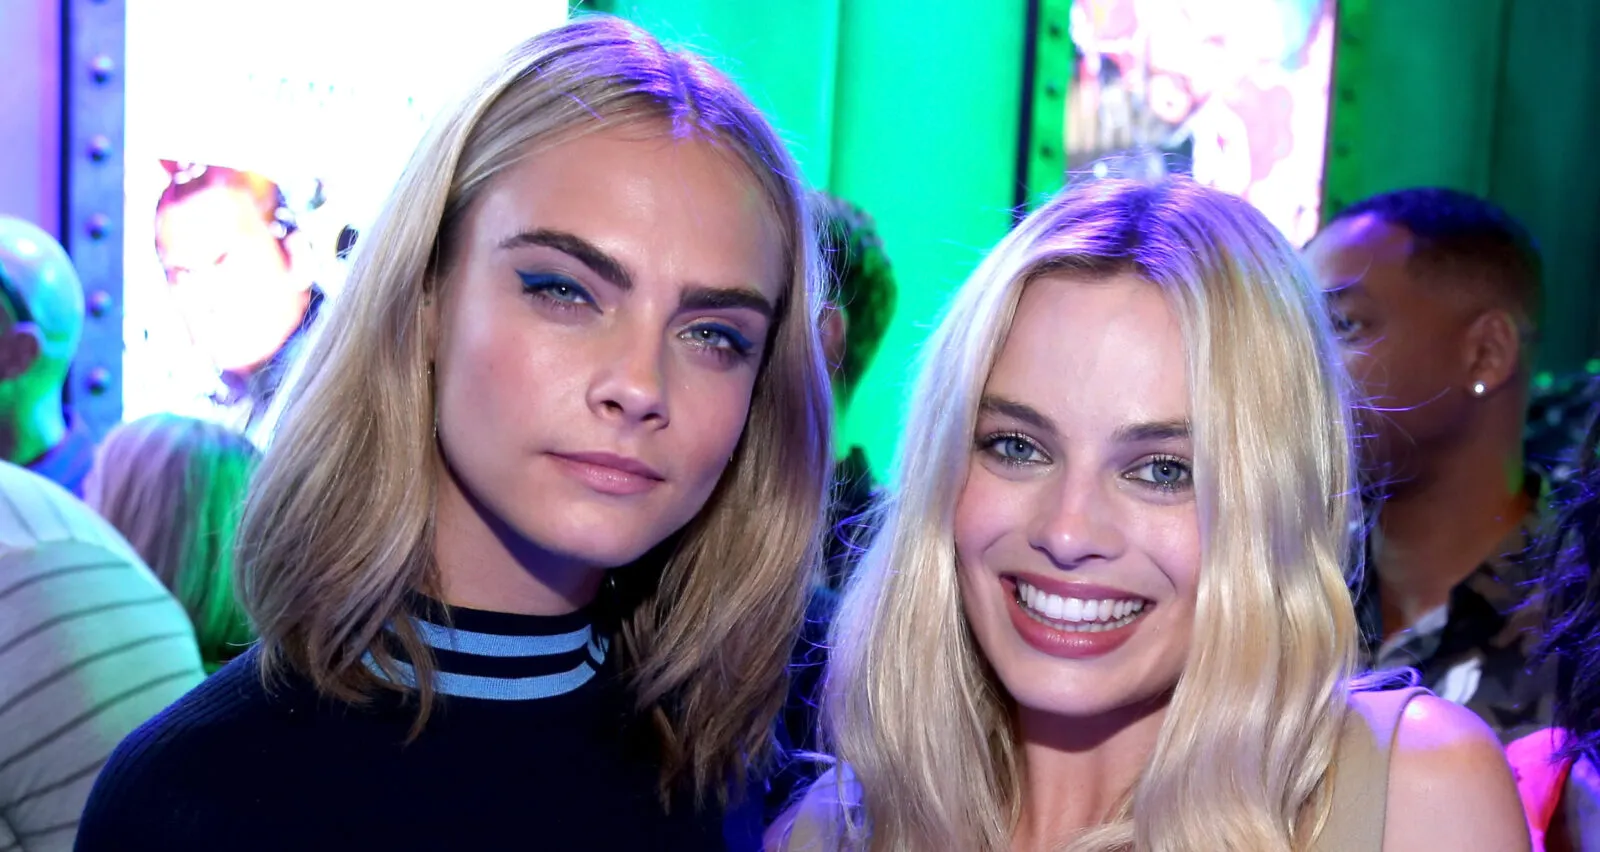 Margot Robbie and Cara Delevingne get caught up in an altercation with the paparazzi